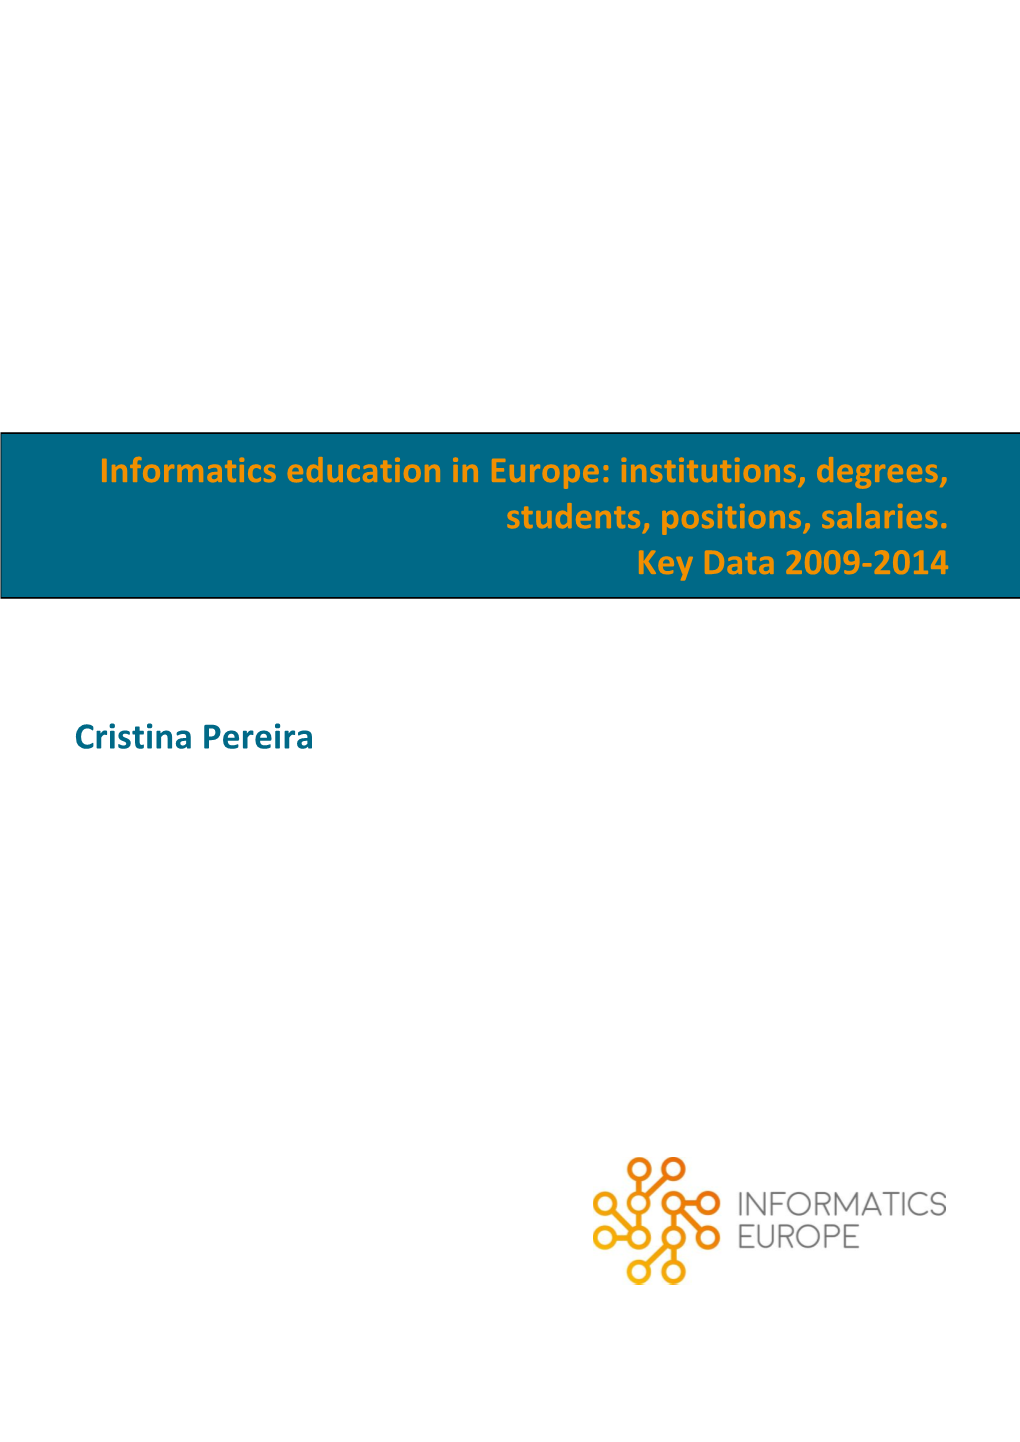 Informatics Education in Europe: Institutions, Degrees, Students, Positions, Salaries